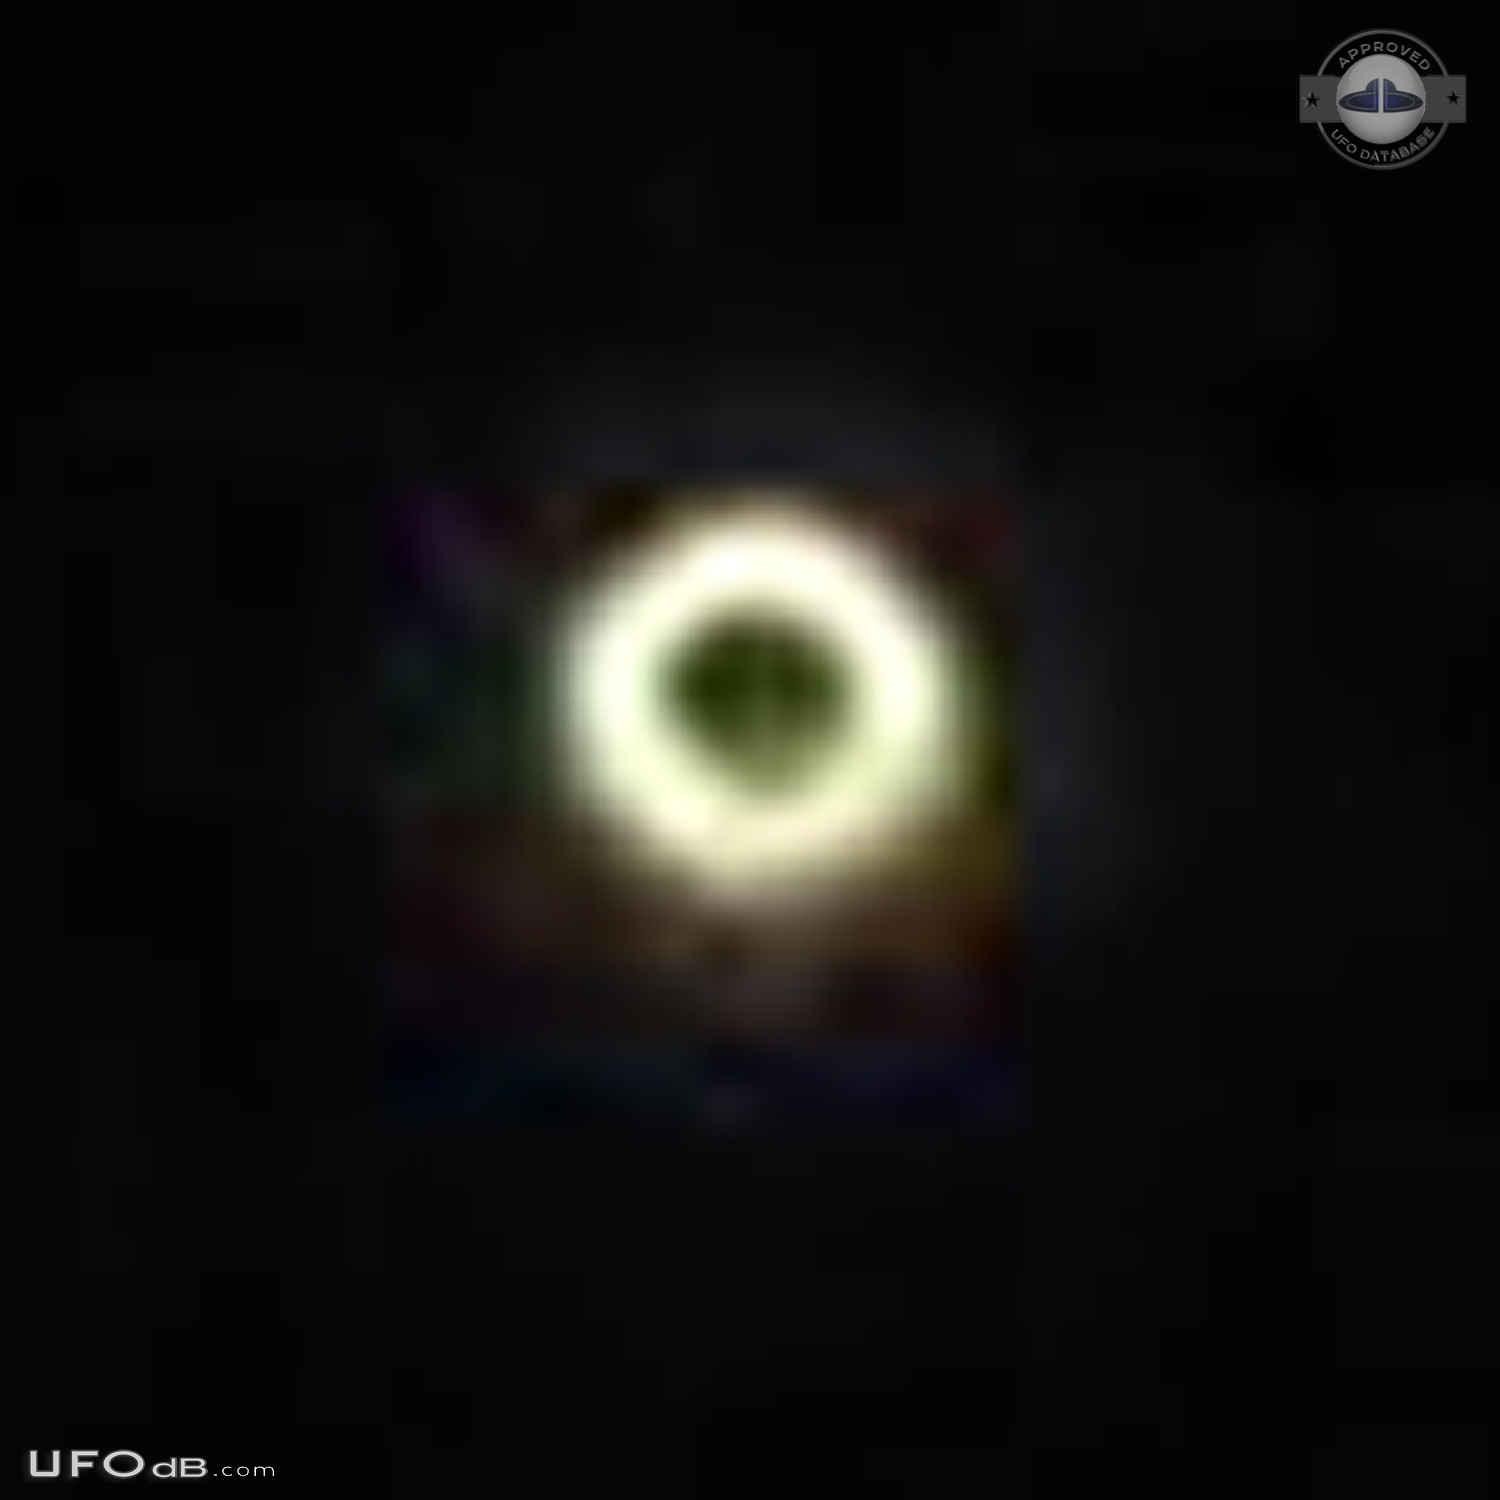 Thought was a star but UFO 10x larger than any other star - Florida UFO Picture #718-7